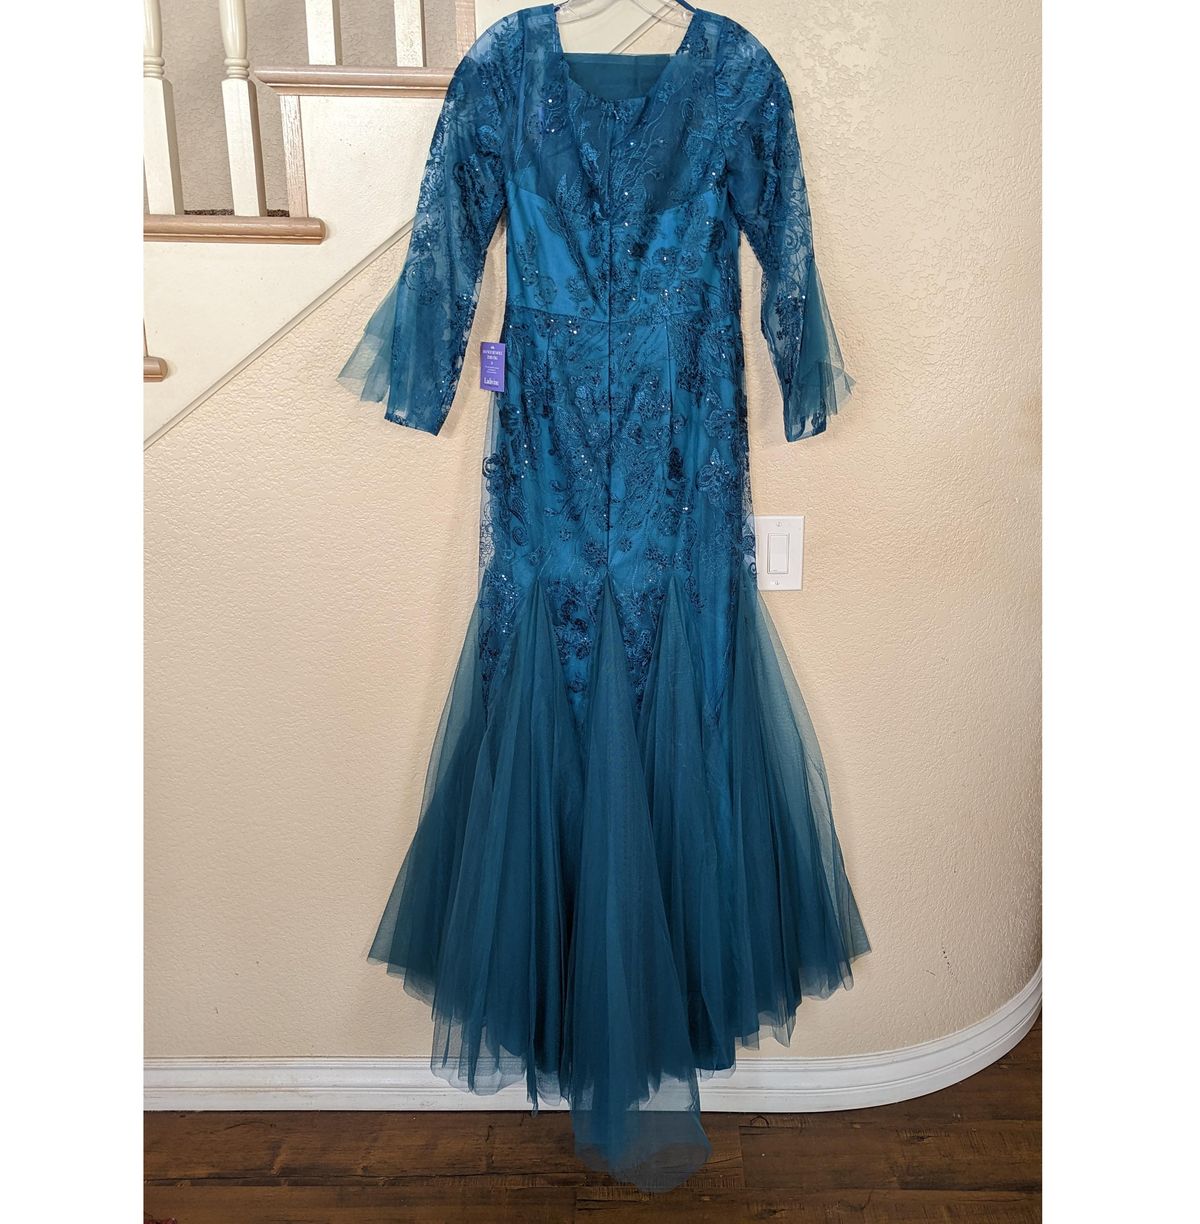 Style  Teal Blue Embroidered V-neck Sheer Bell Sleeve Mermaid Formal Gown LaDivine Size 12 Blue Mermaid Dress on Queenly